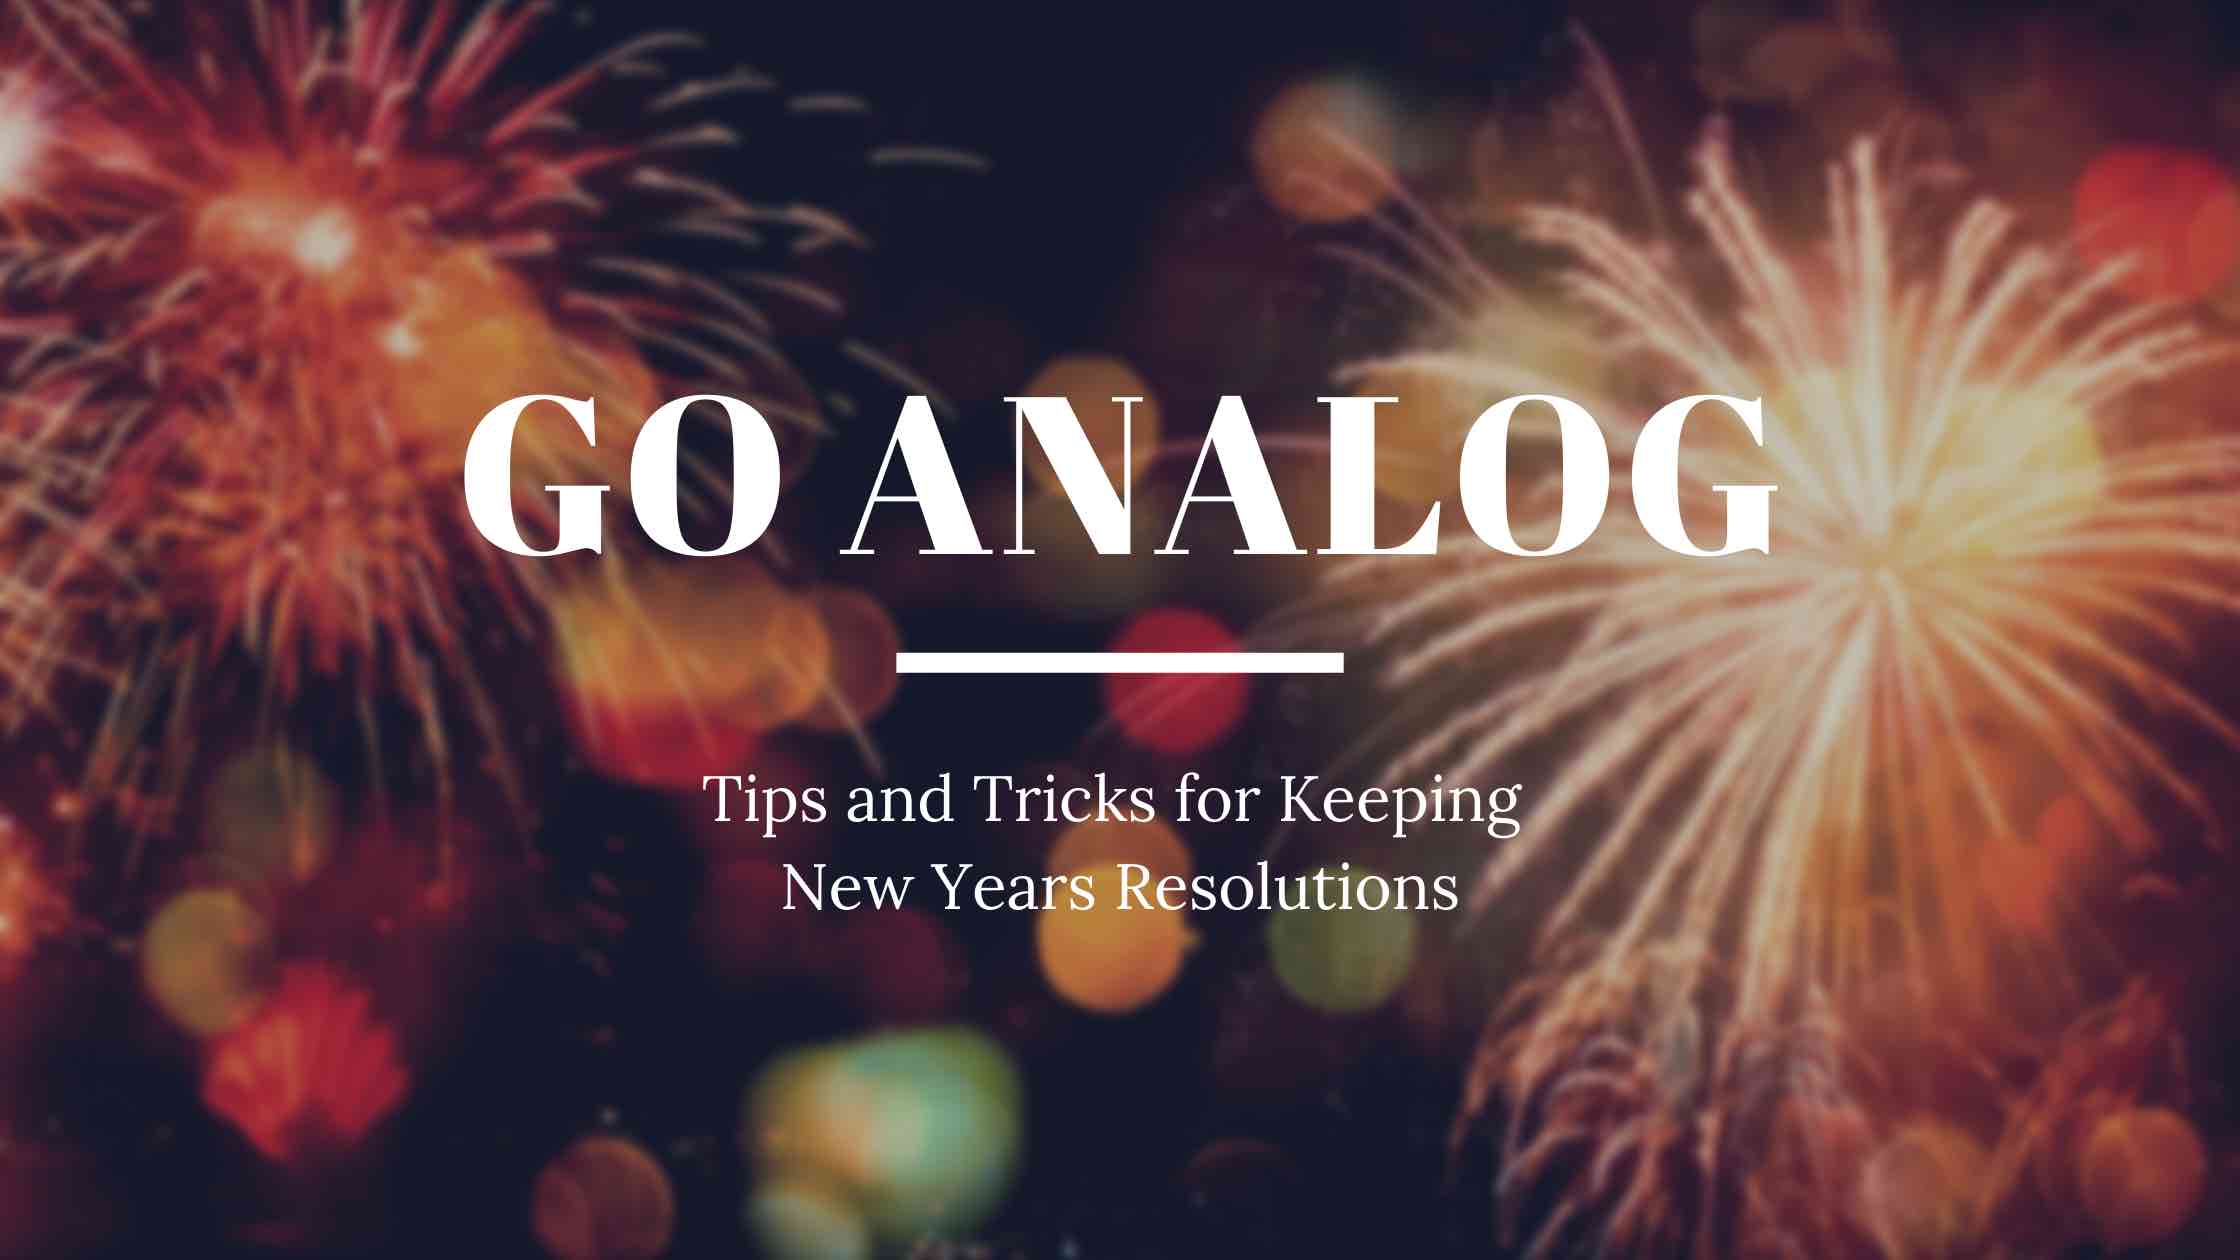 Fireworks go off in the background as a metaphor for how to keep your resolutions, one idea is going analog.